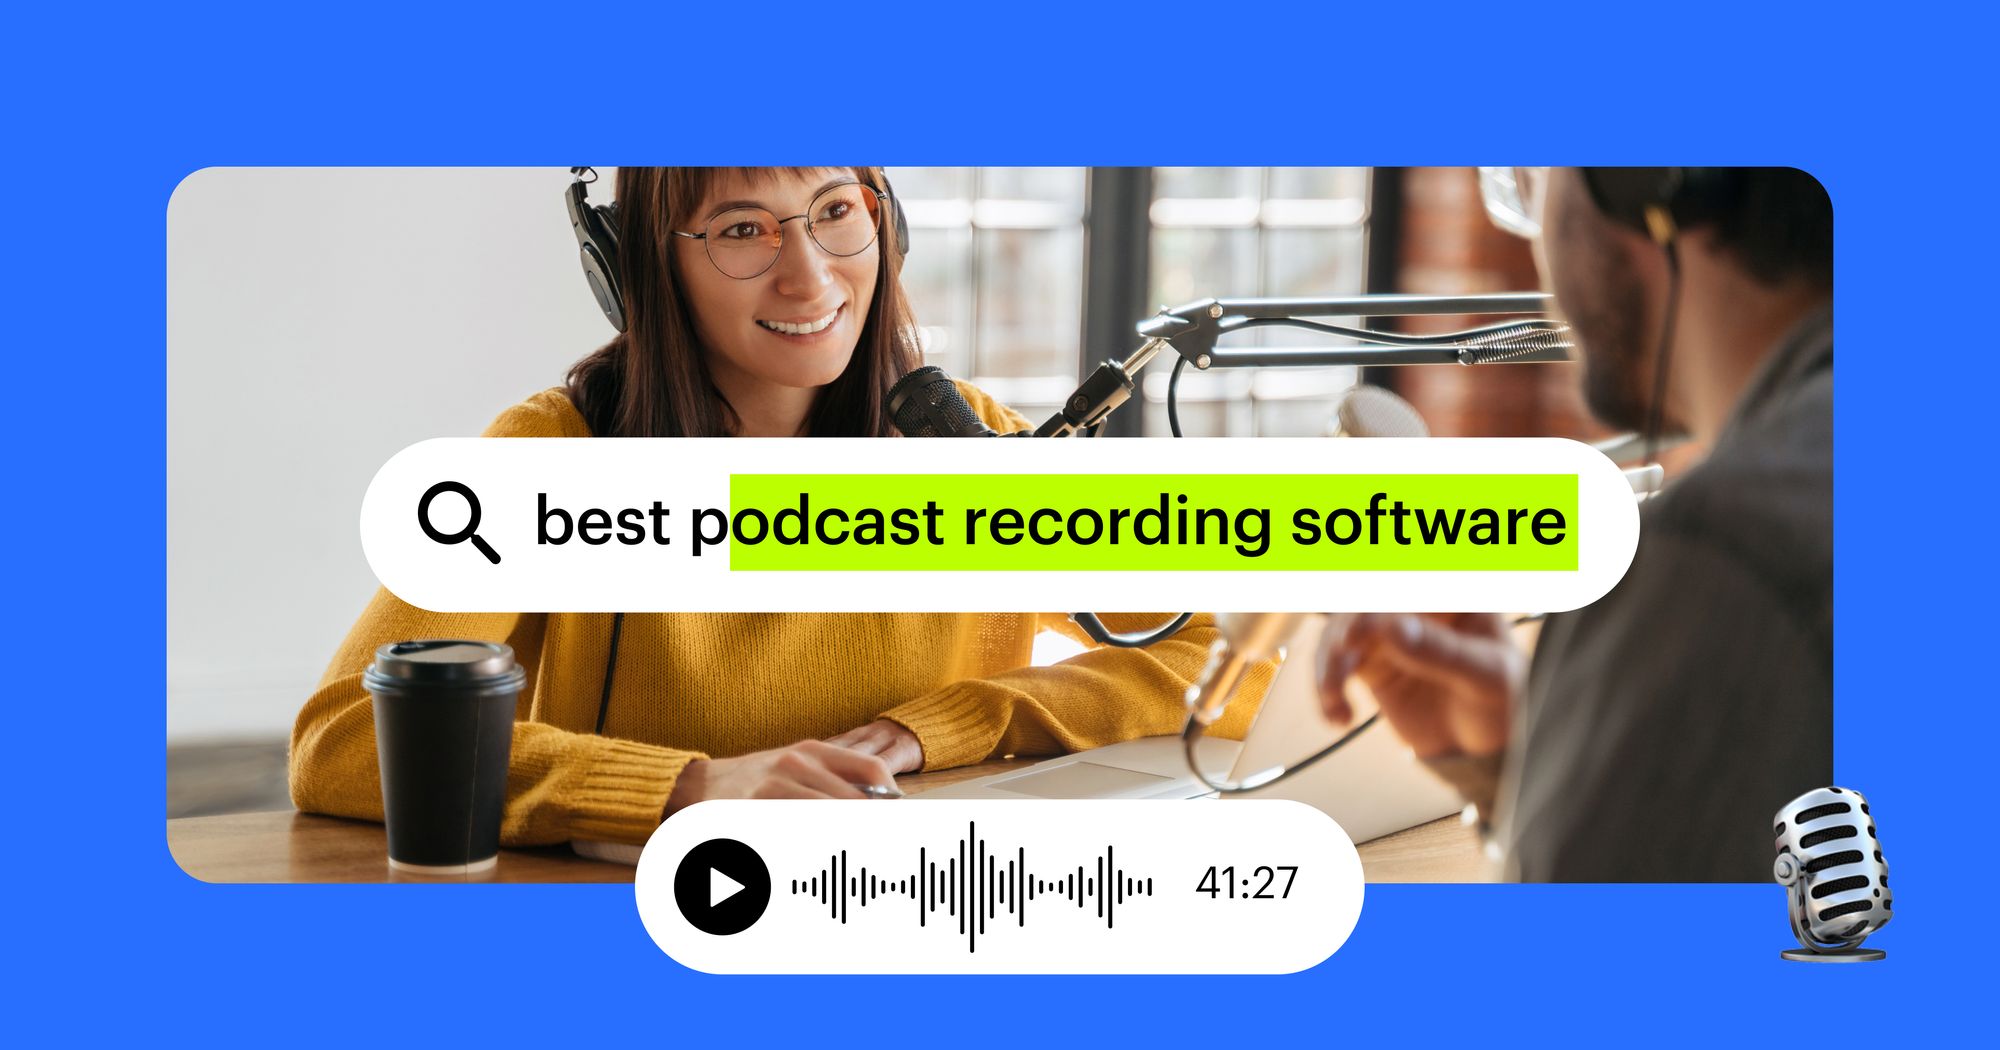 Podcast software: how to choose and which are the best?